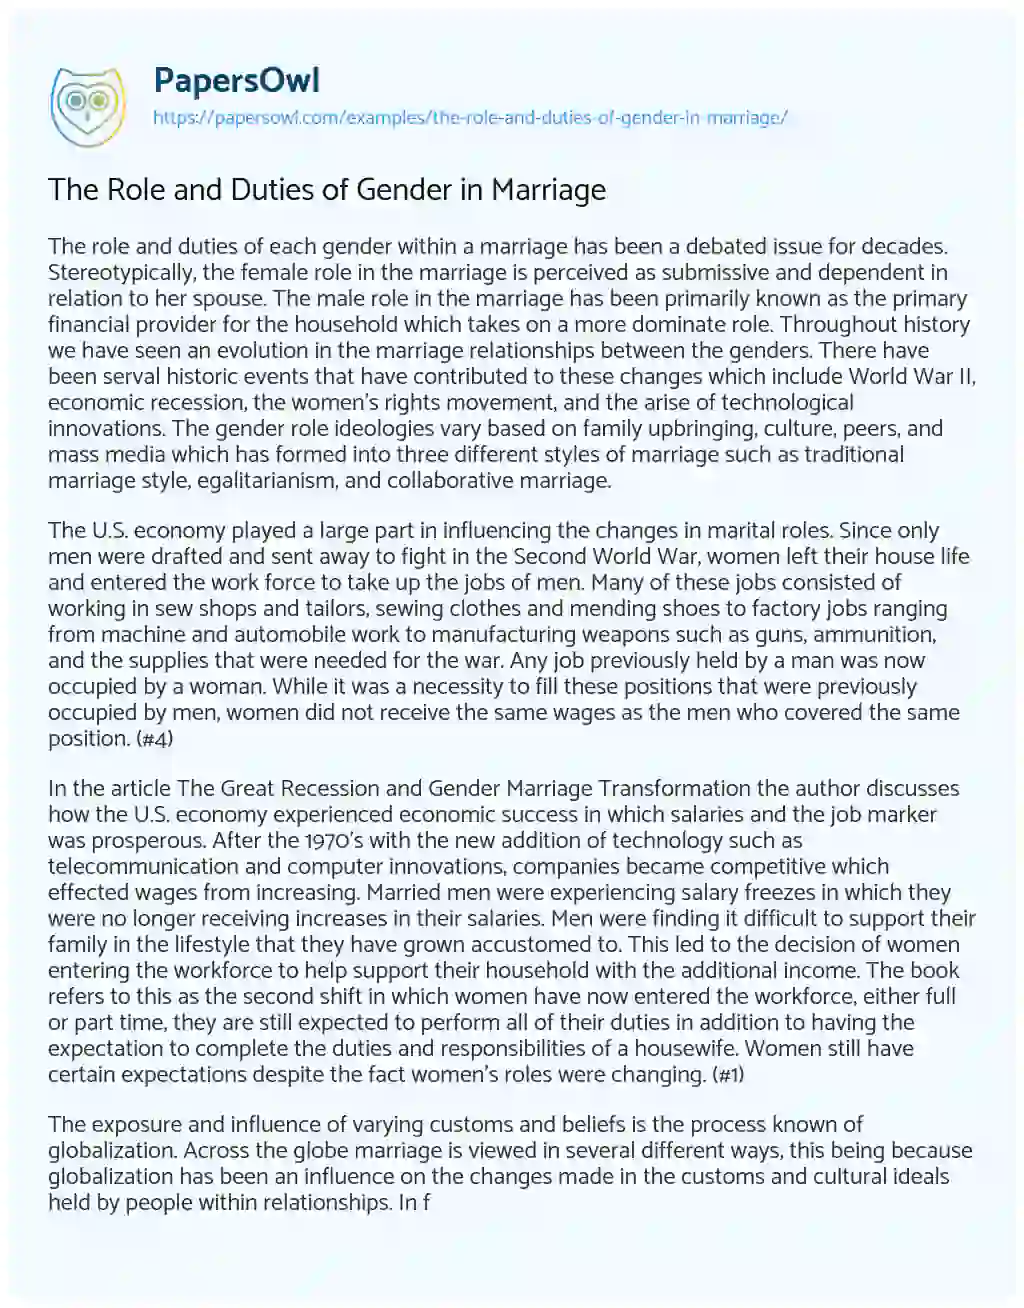 The Role and Duties of Gender in Marriage essay